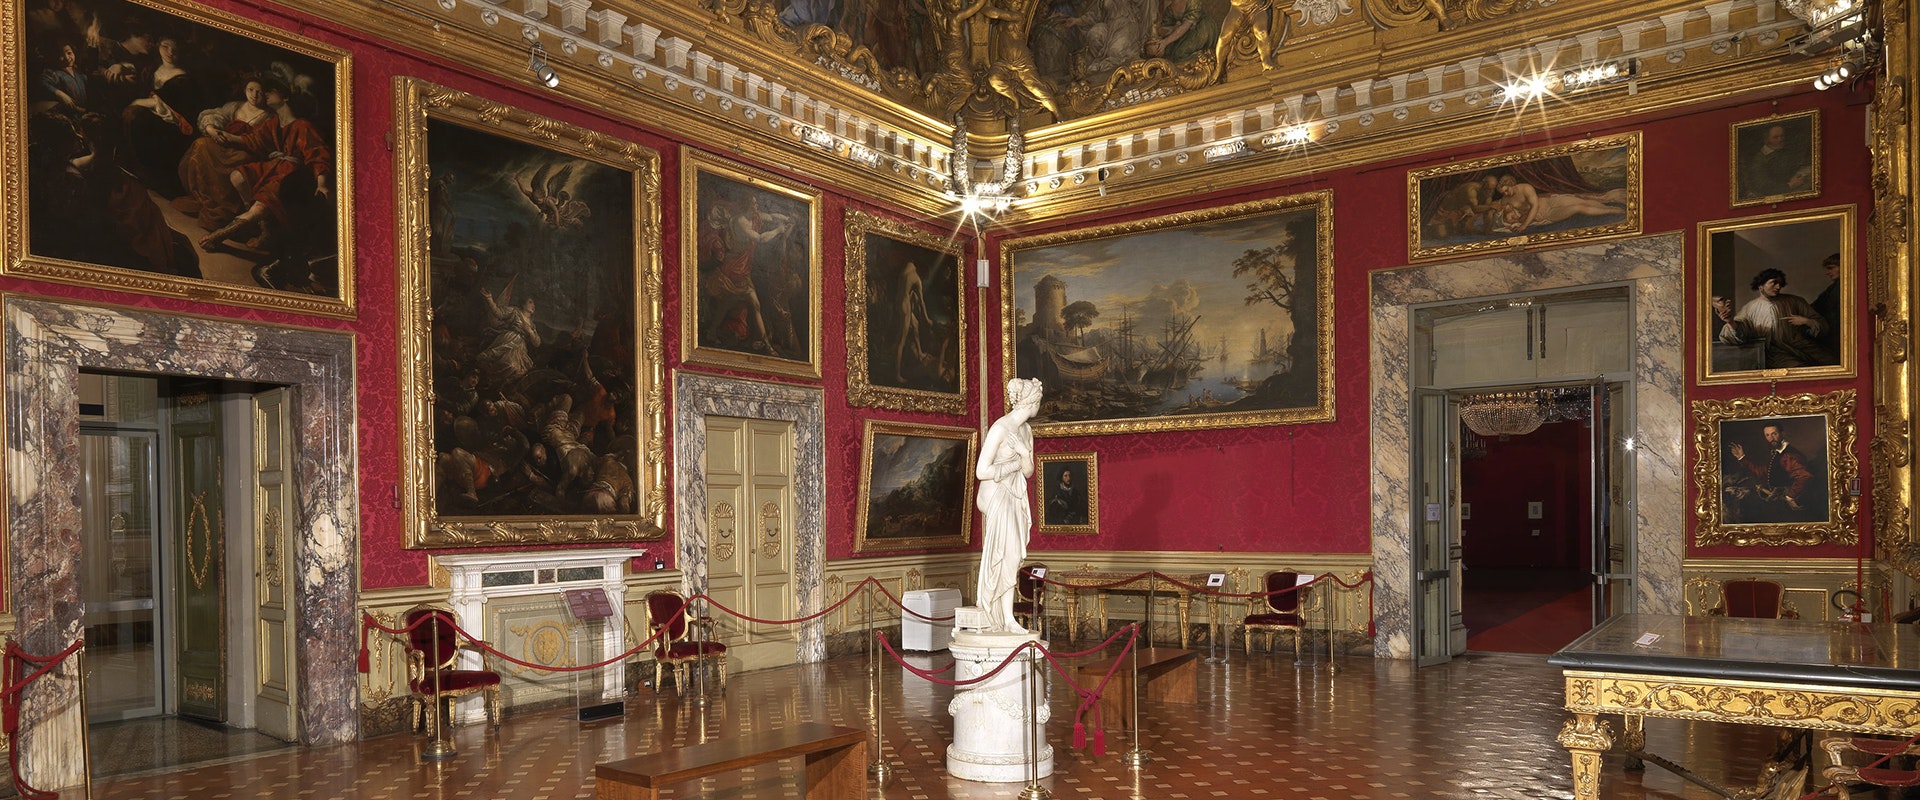 Free admission to the Uffizi Galleries' museums from 5 to 10 March 2019